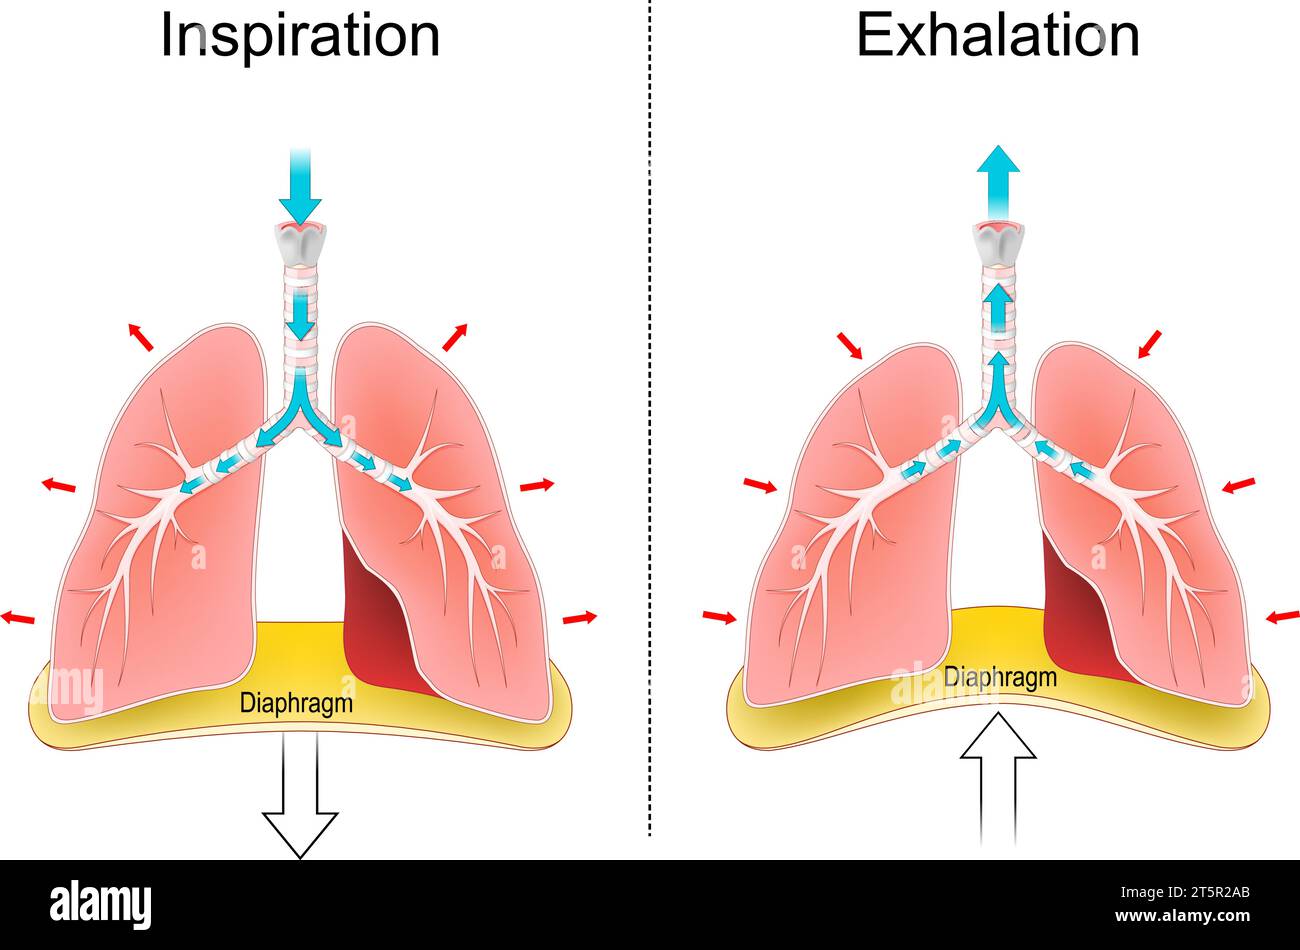 Breathing. Respiration, movements of the chest, lungs, and diaphragm. Gas exchange. Inhalation or inspiration, and Exhalation. Human Respiratory syste Stock Vector